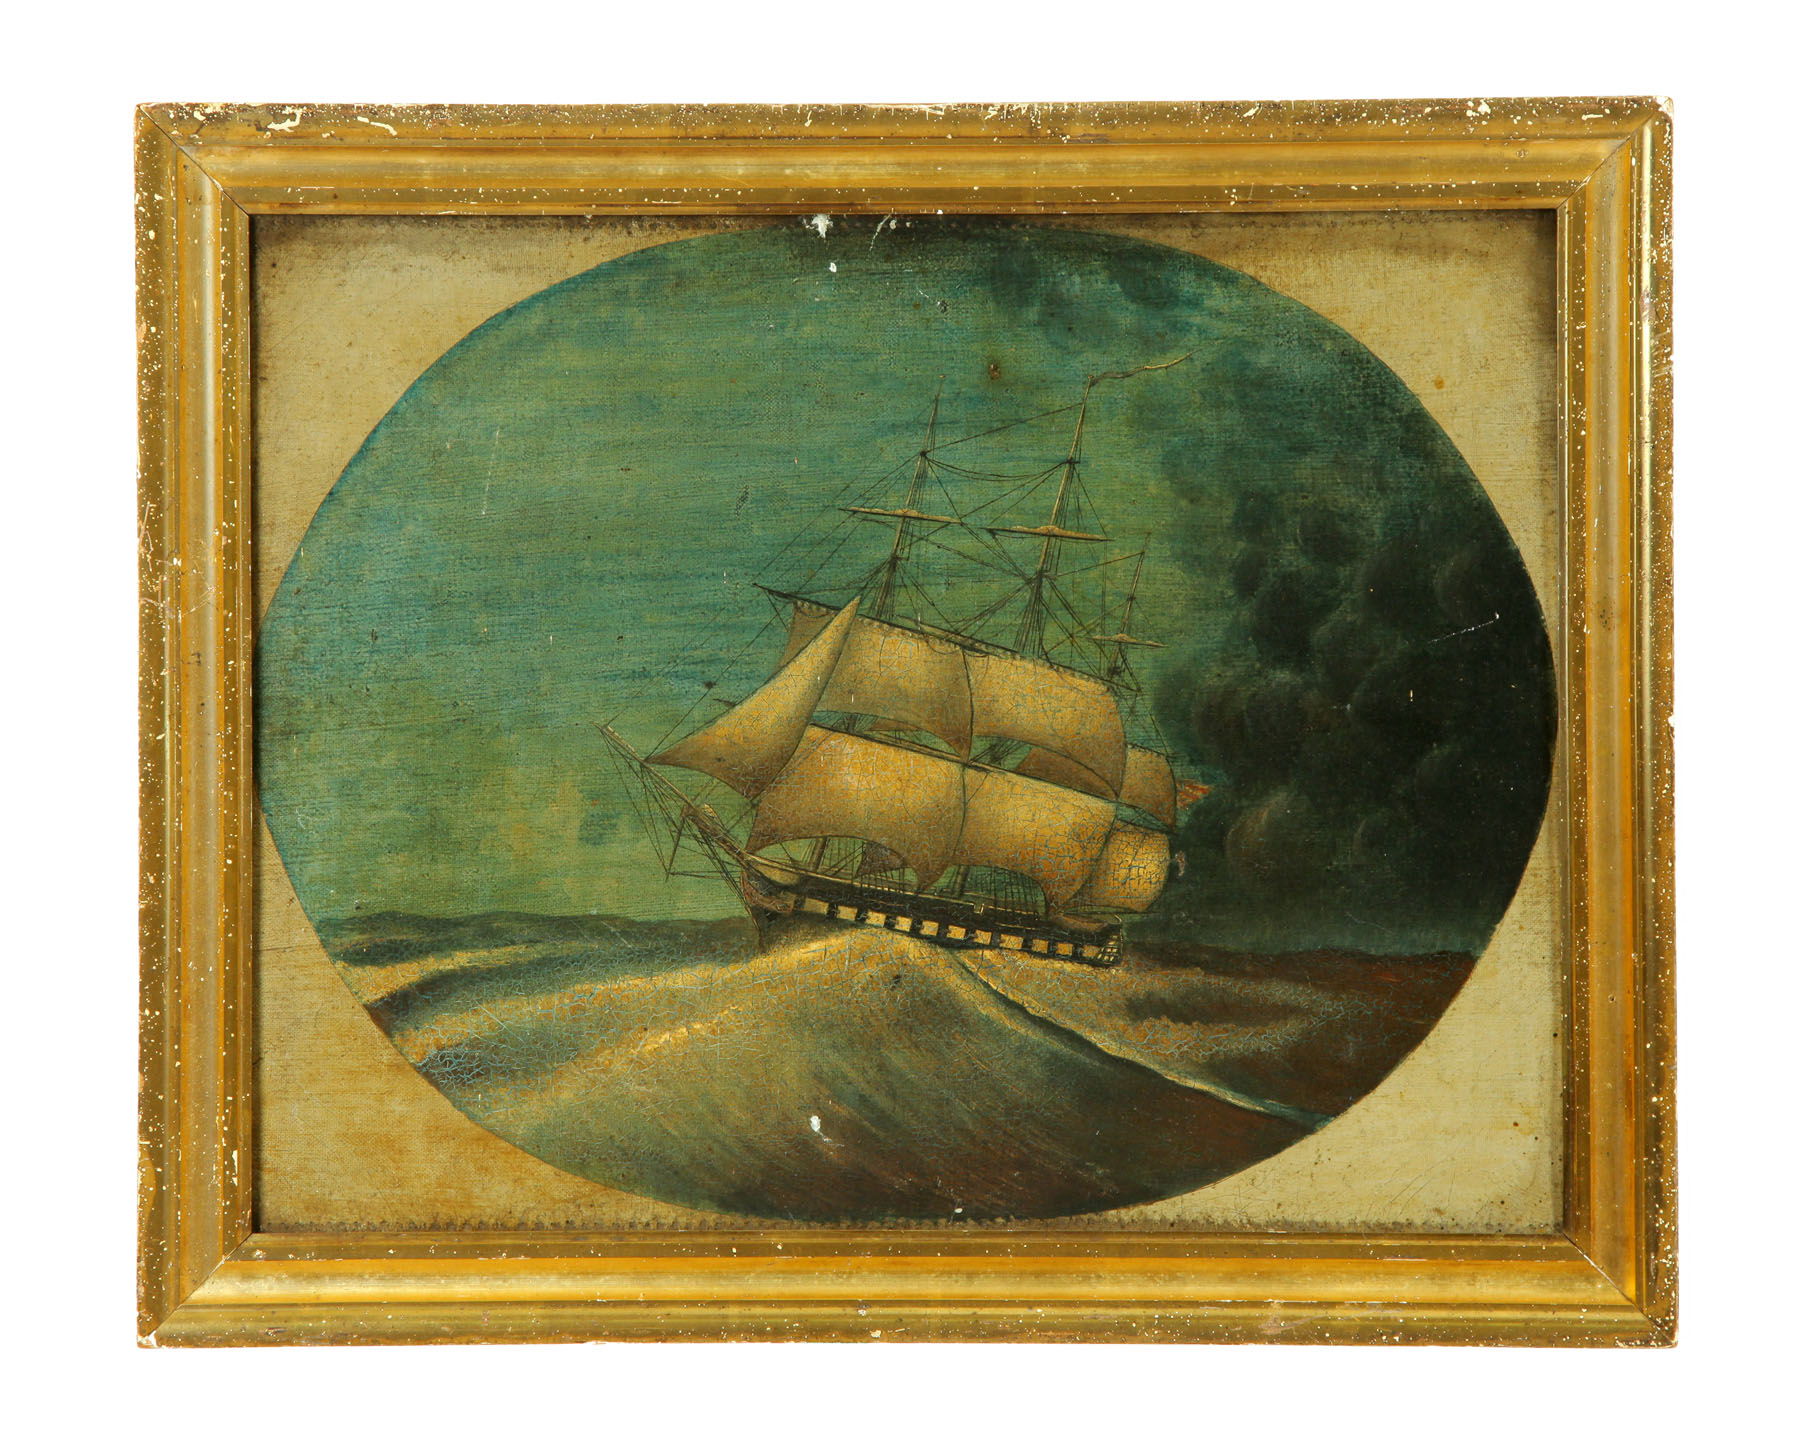 PAINTING OF A SHIP AMERICAN OR 116fd1